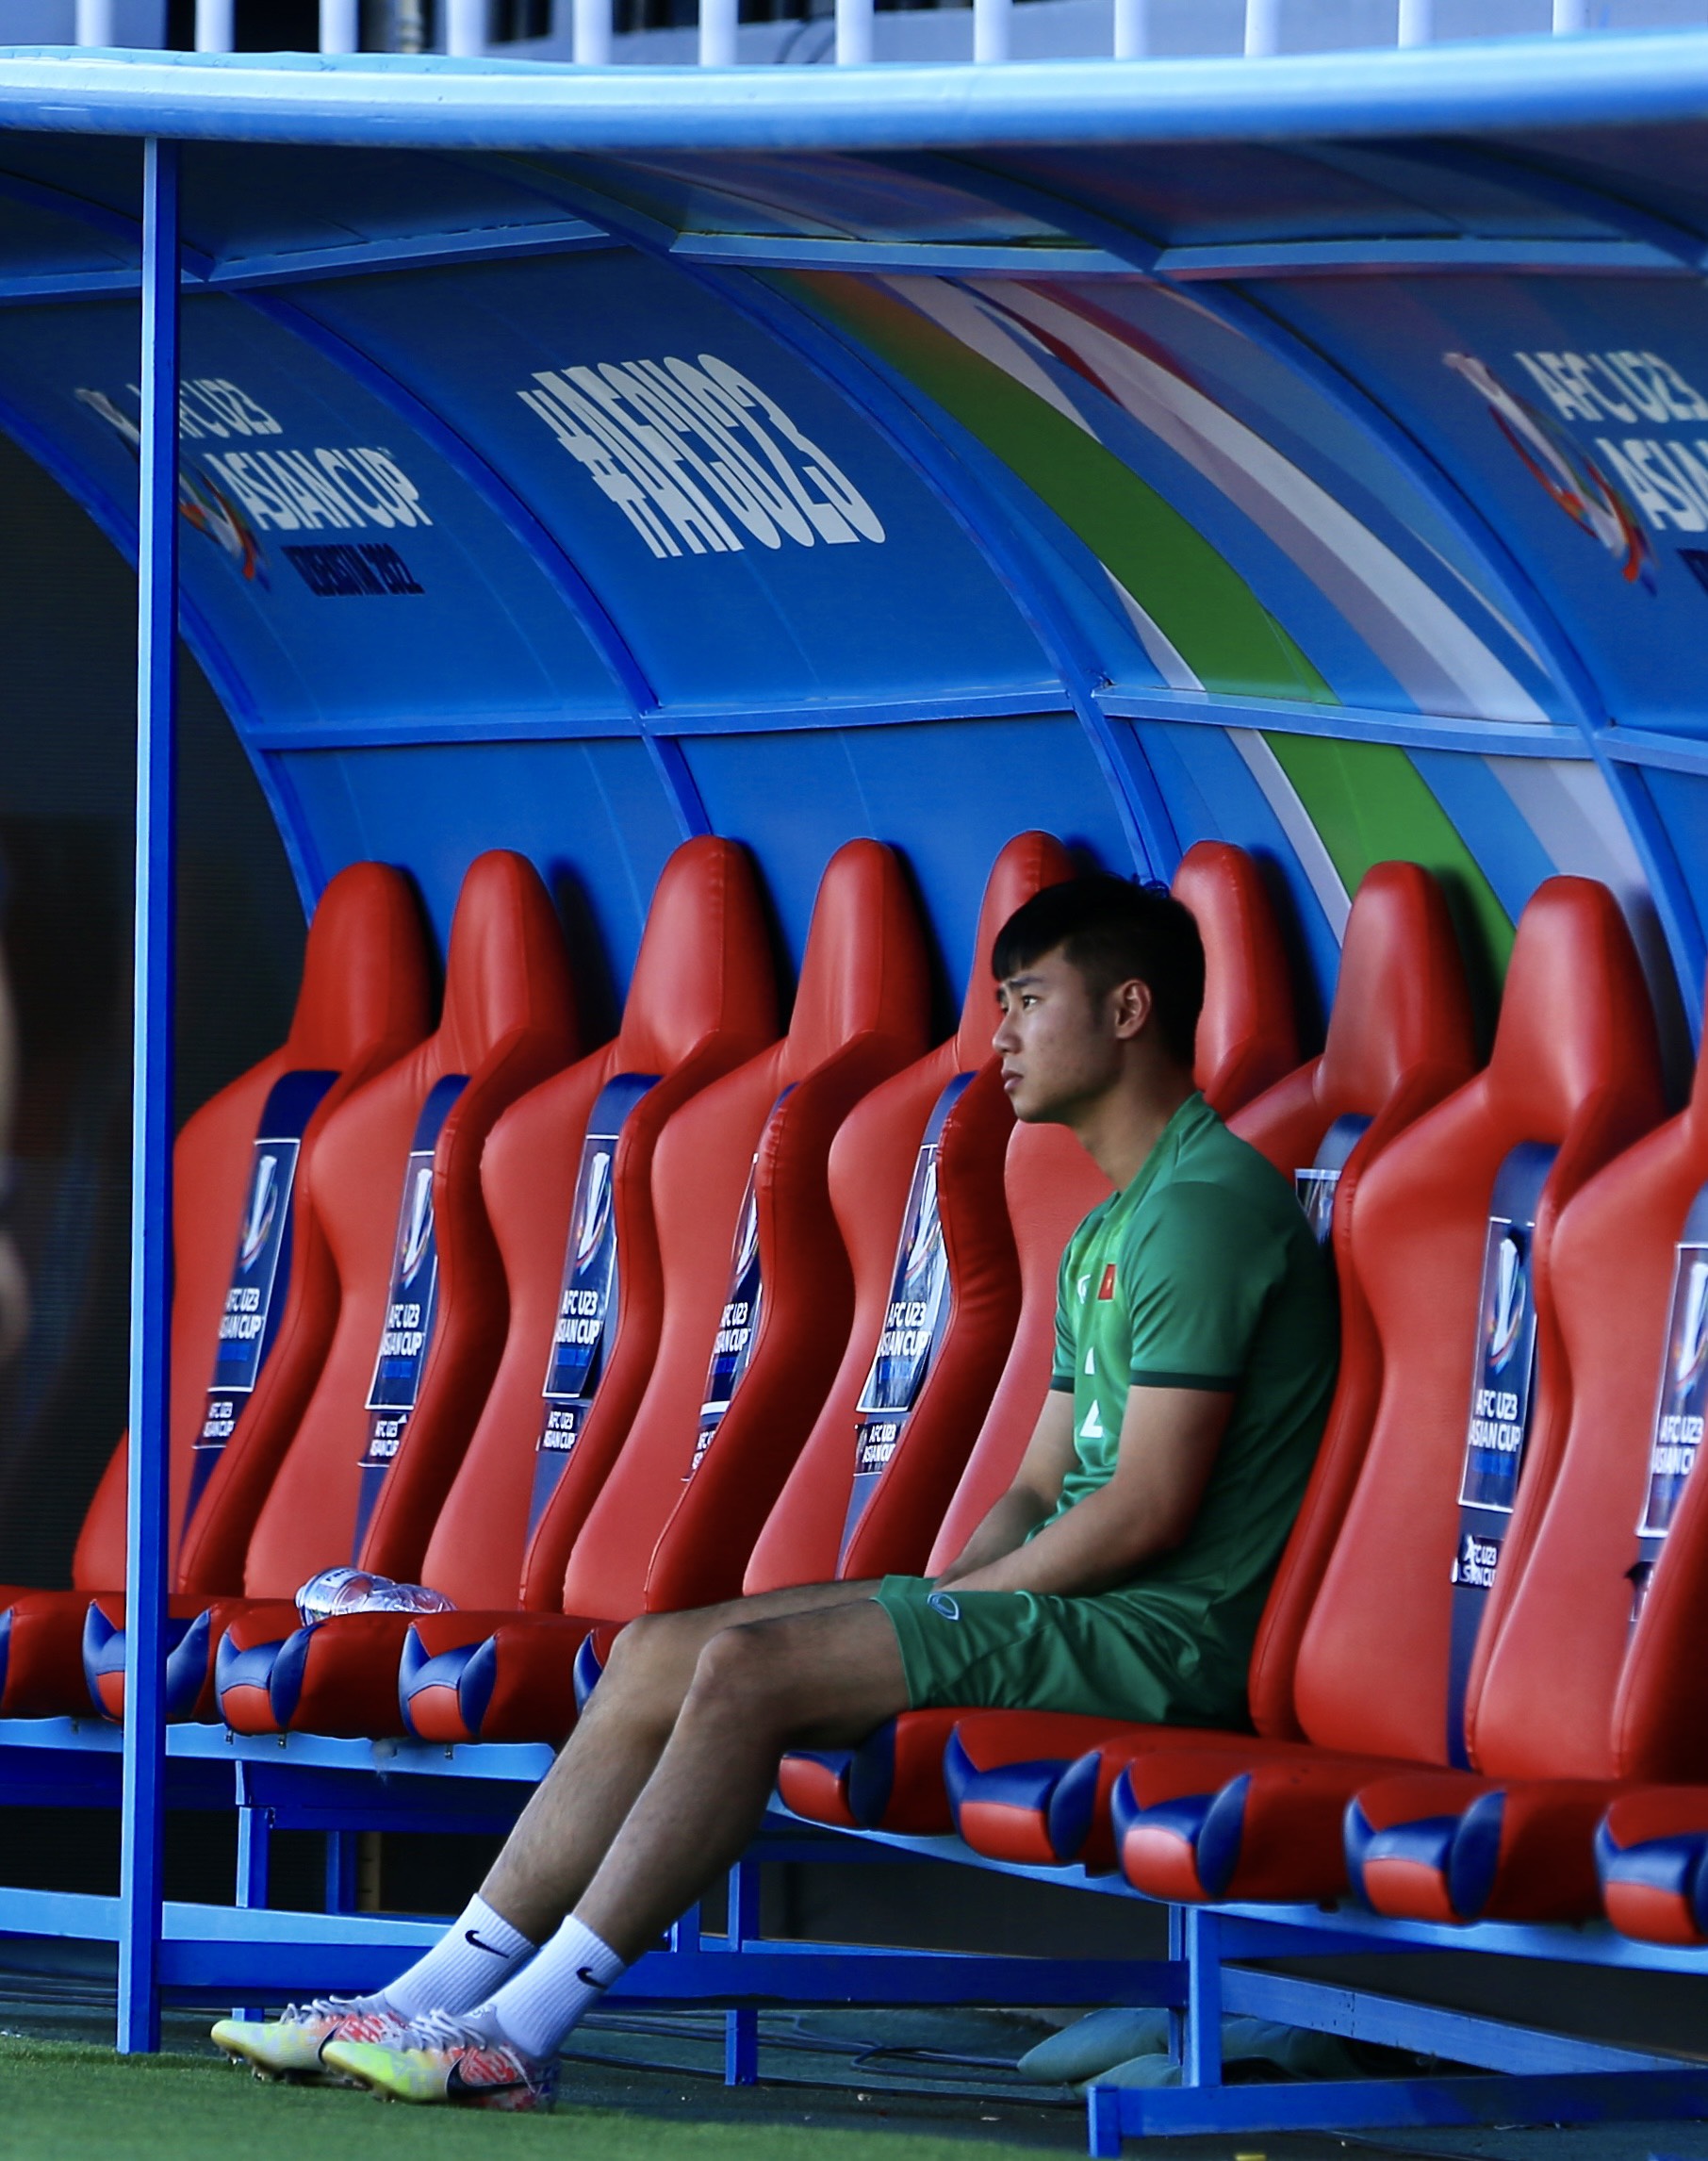 Van Toan sat contemplatively looking at his teammates, Dung Quang Nho recharged before U23 Vietnam played - Photo 1.